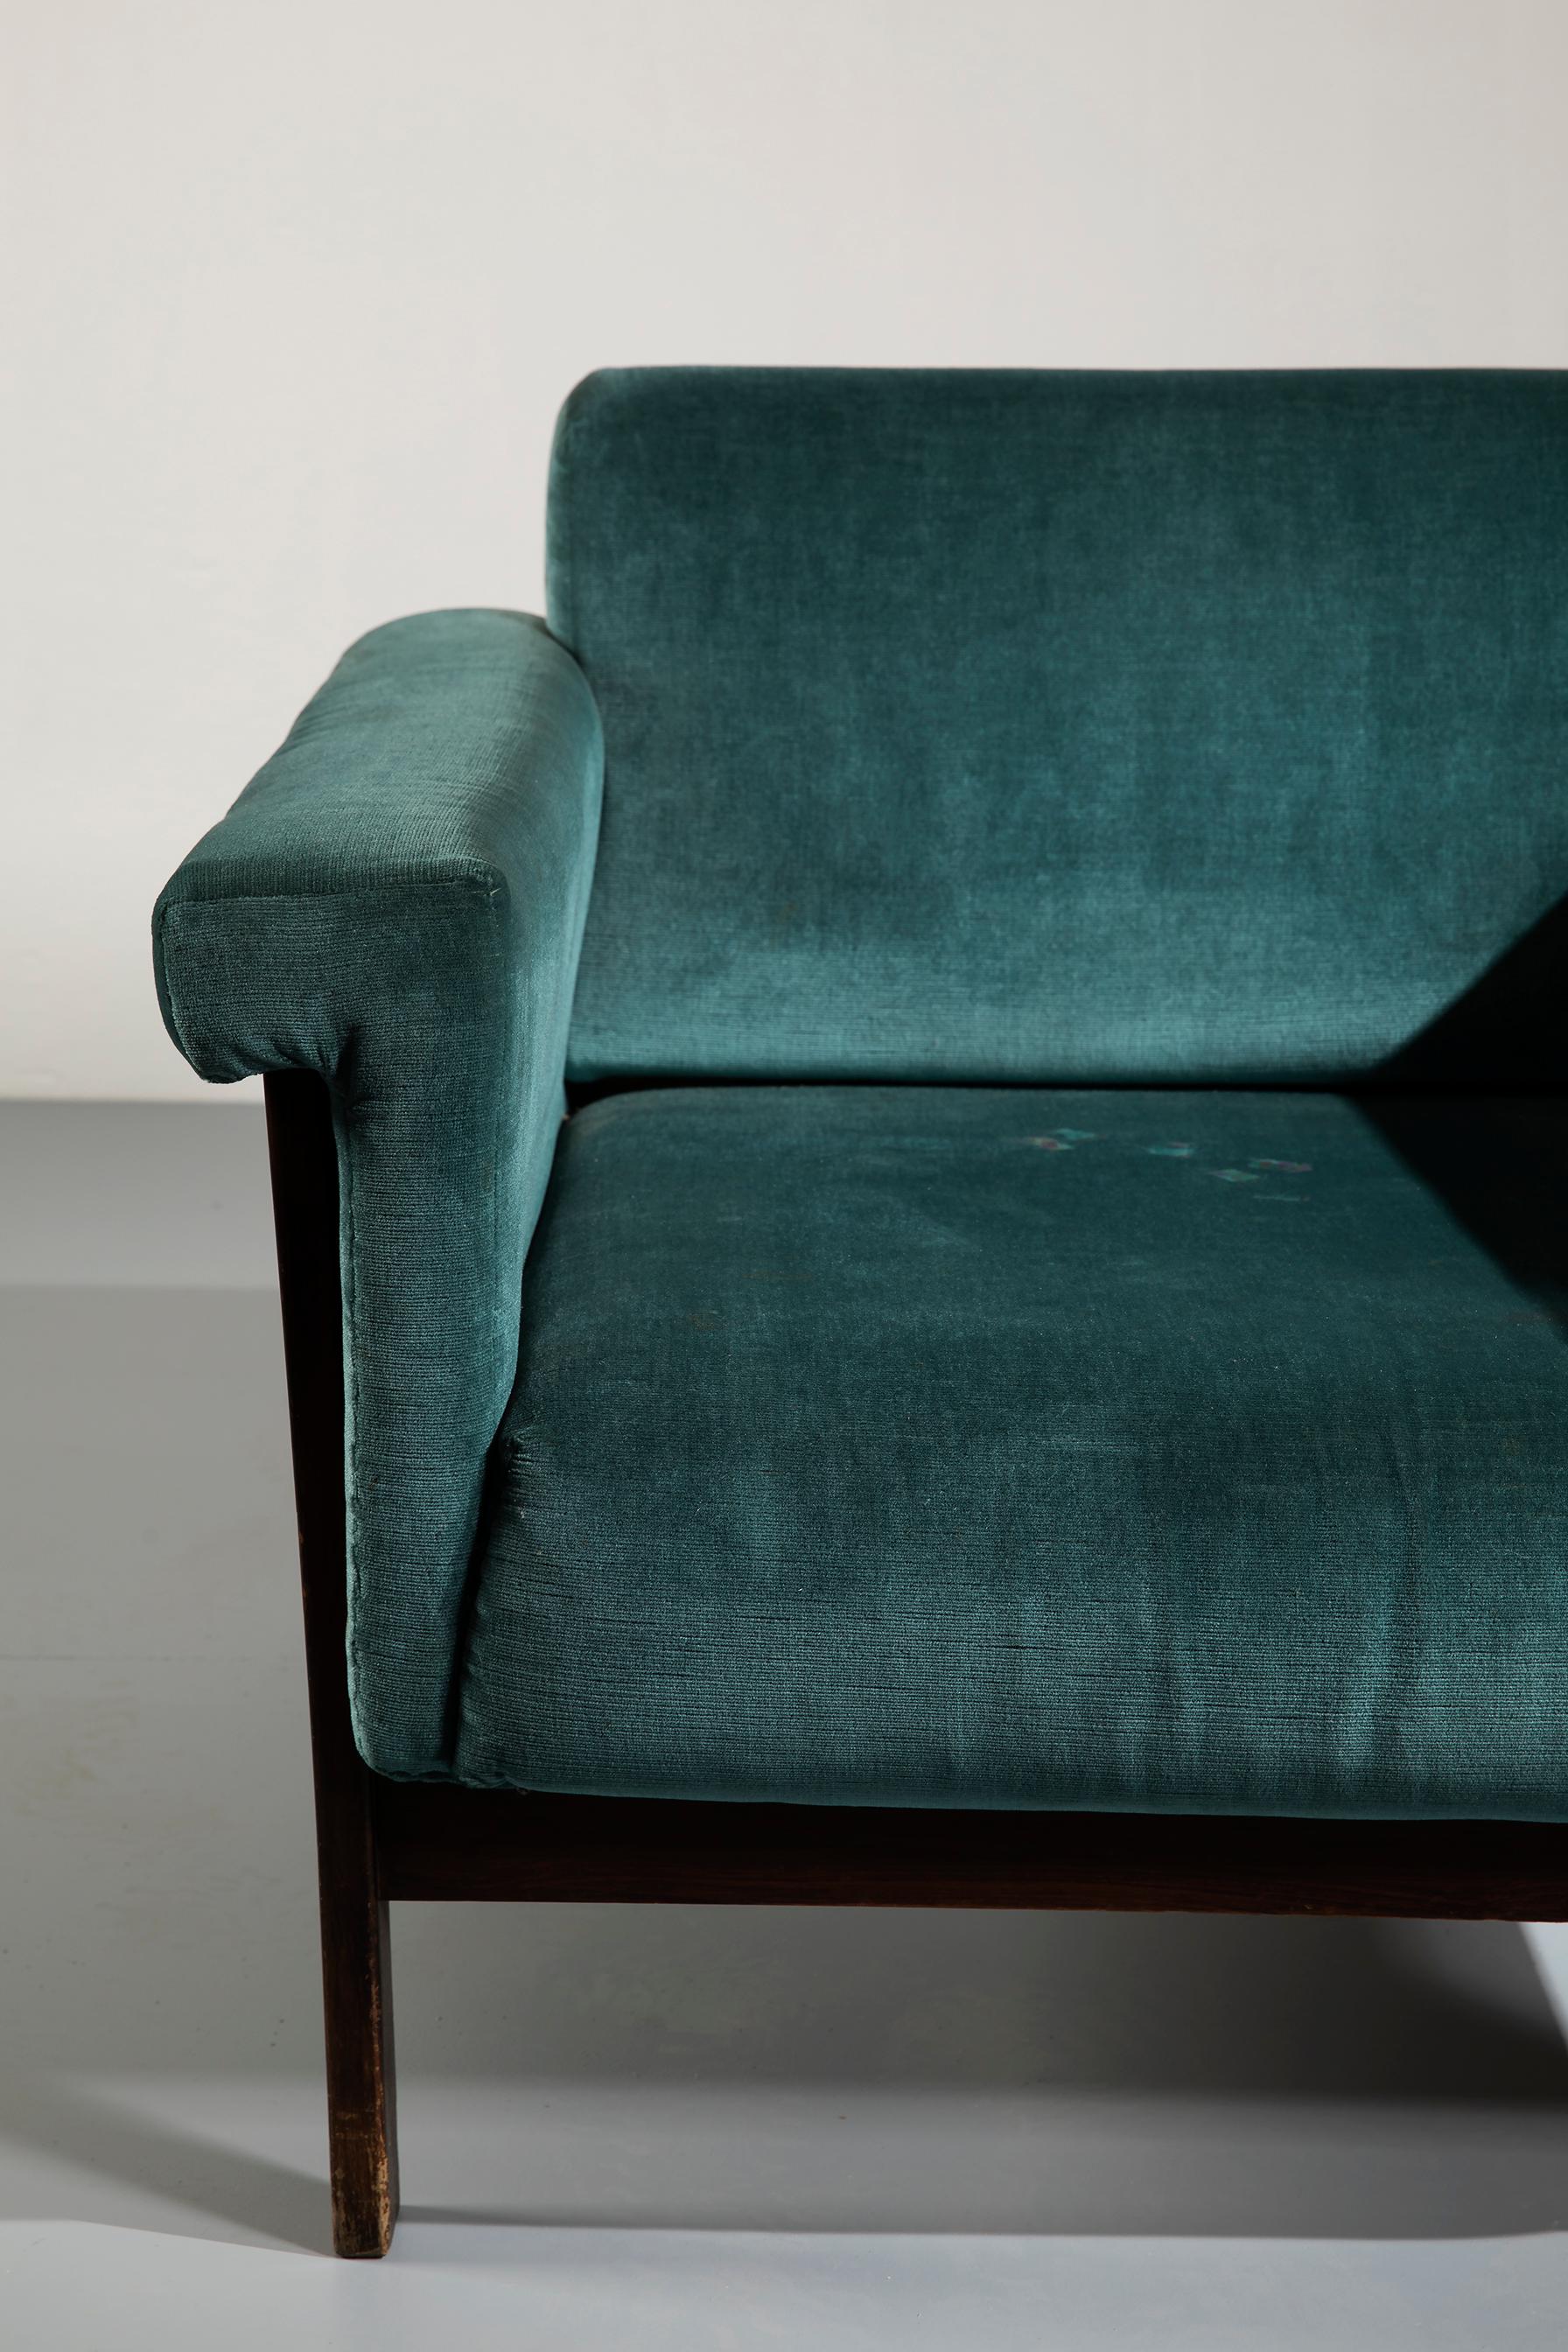 Mid-20th Century Ettore Sottsass Rosewood and Teal Fabric 'Canada' Armchair for Poltronova, 1958 For Sale